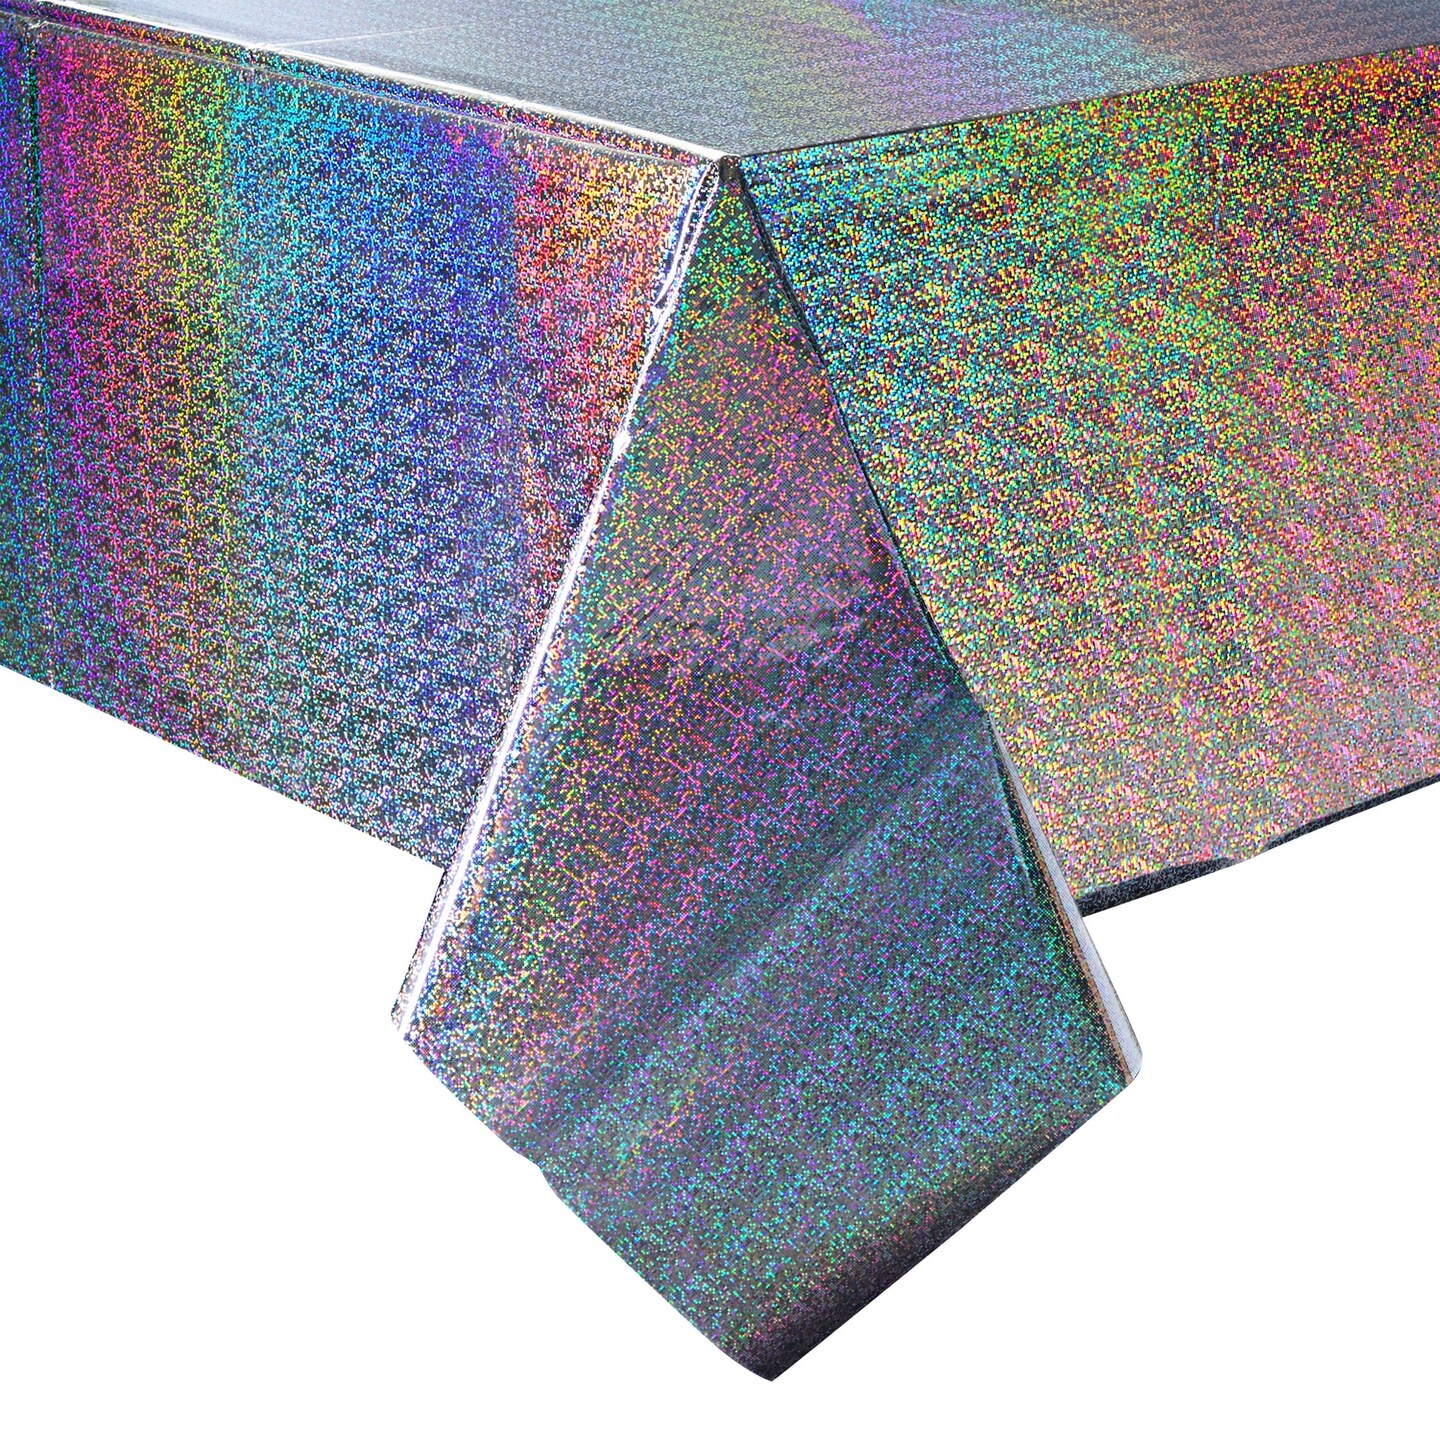 Iridescent Plastic Table Covers, Silver Holographic Foil (54 x 108 in, 3 Pack)